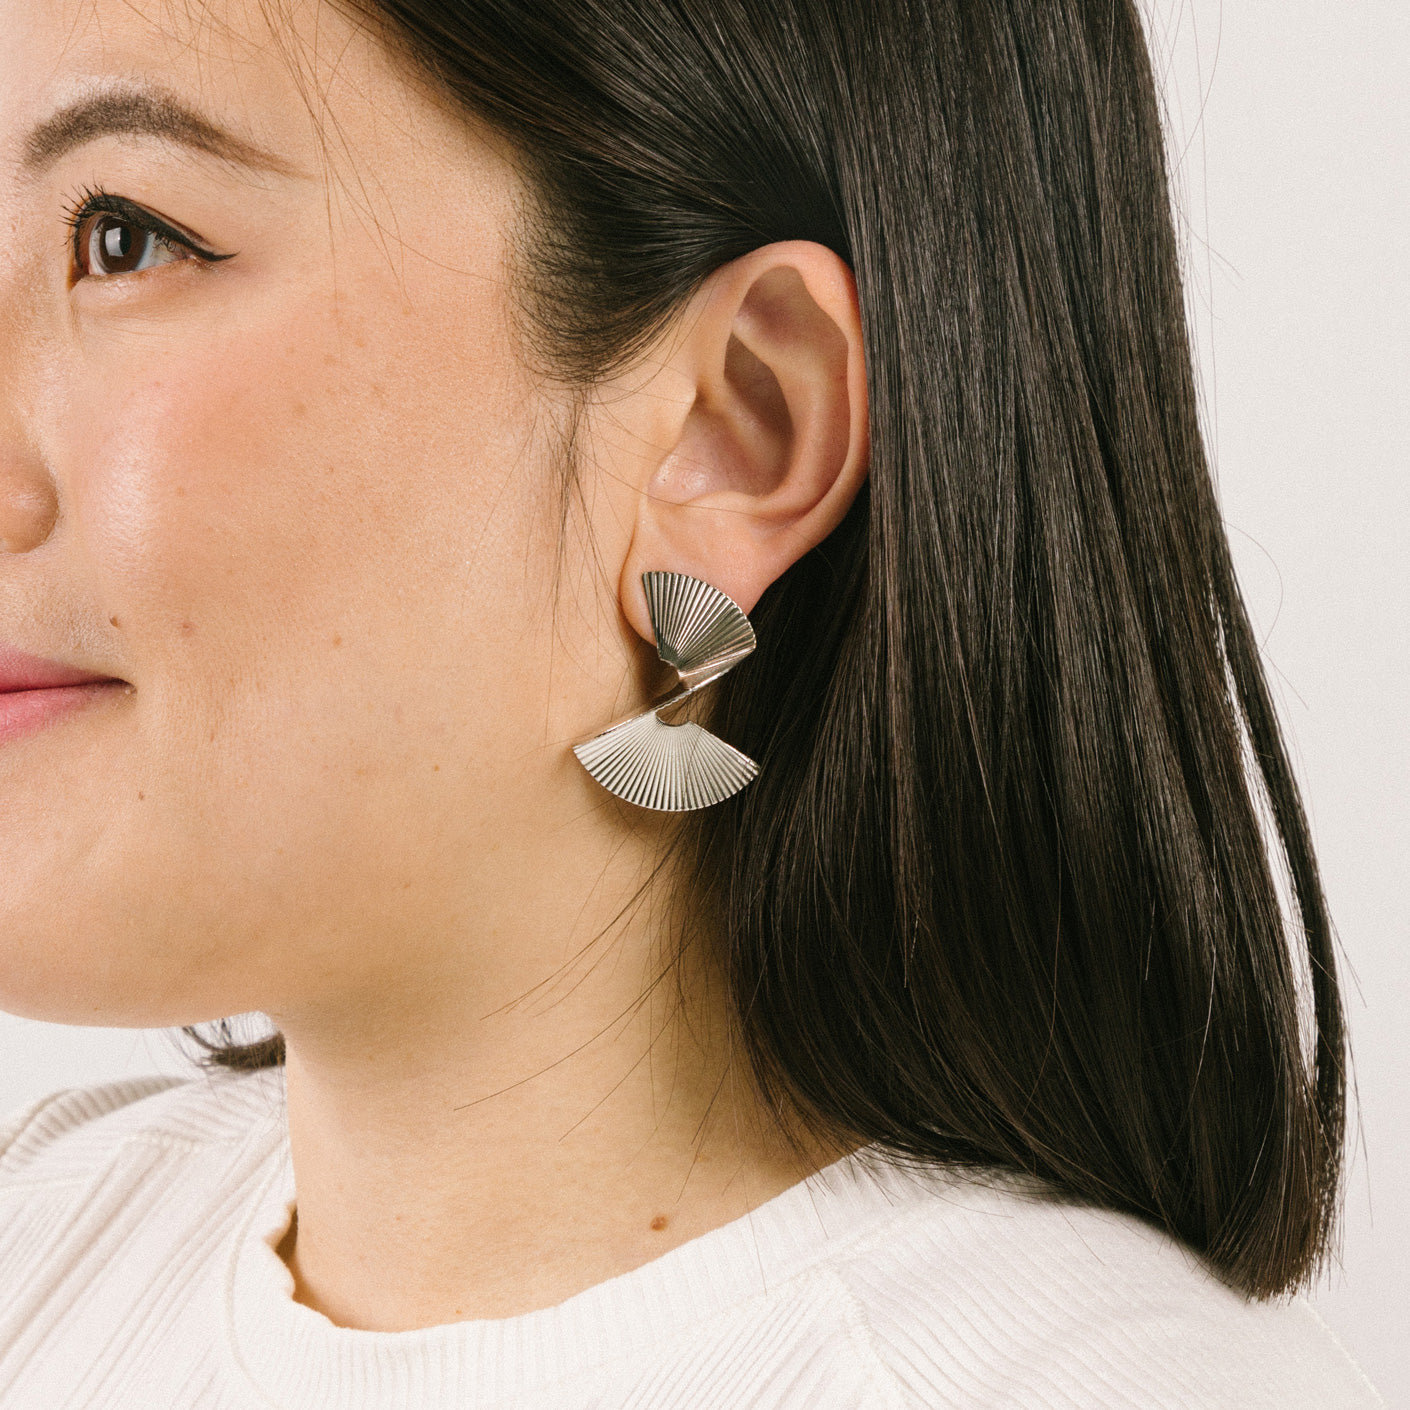 A model wearing the Ribbed Swirl Clip On Earrings in Silver feature a padded clip-on closure that can be worn comfortably for 8-12 hours. Made with silver tone copper alloy, these earrings provide a secure hold that can be adjusted to fit all ear types, such as thick/large, sensitive, small/thin, and stretched/healing. Please note, item is sold as one pair.